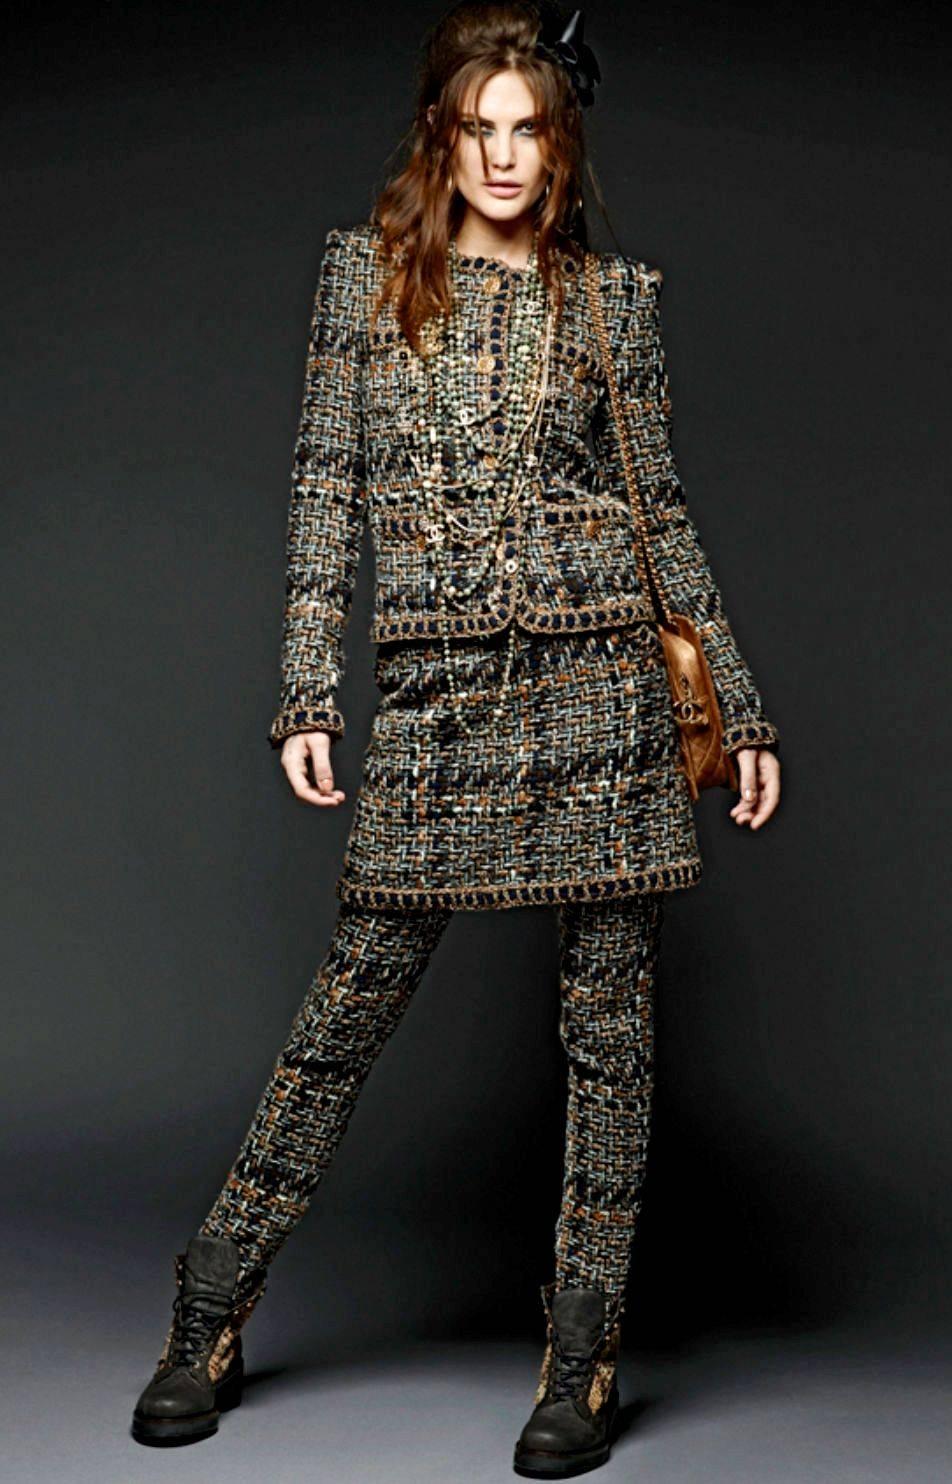 NEW Chanel Metallic Fantasy Tweed Dress with Braid Details 40 For Sale ...